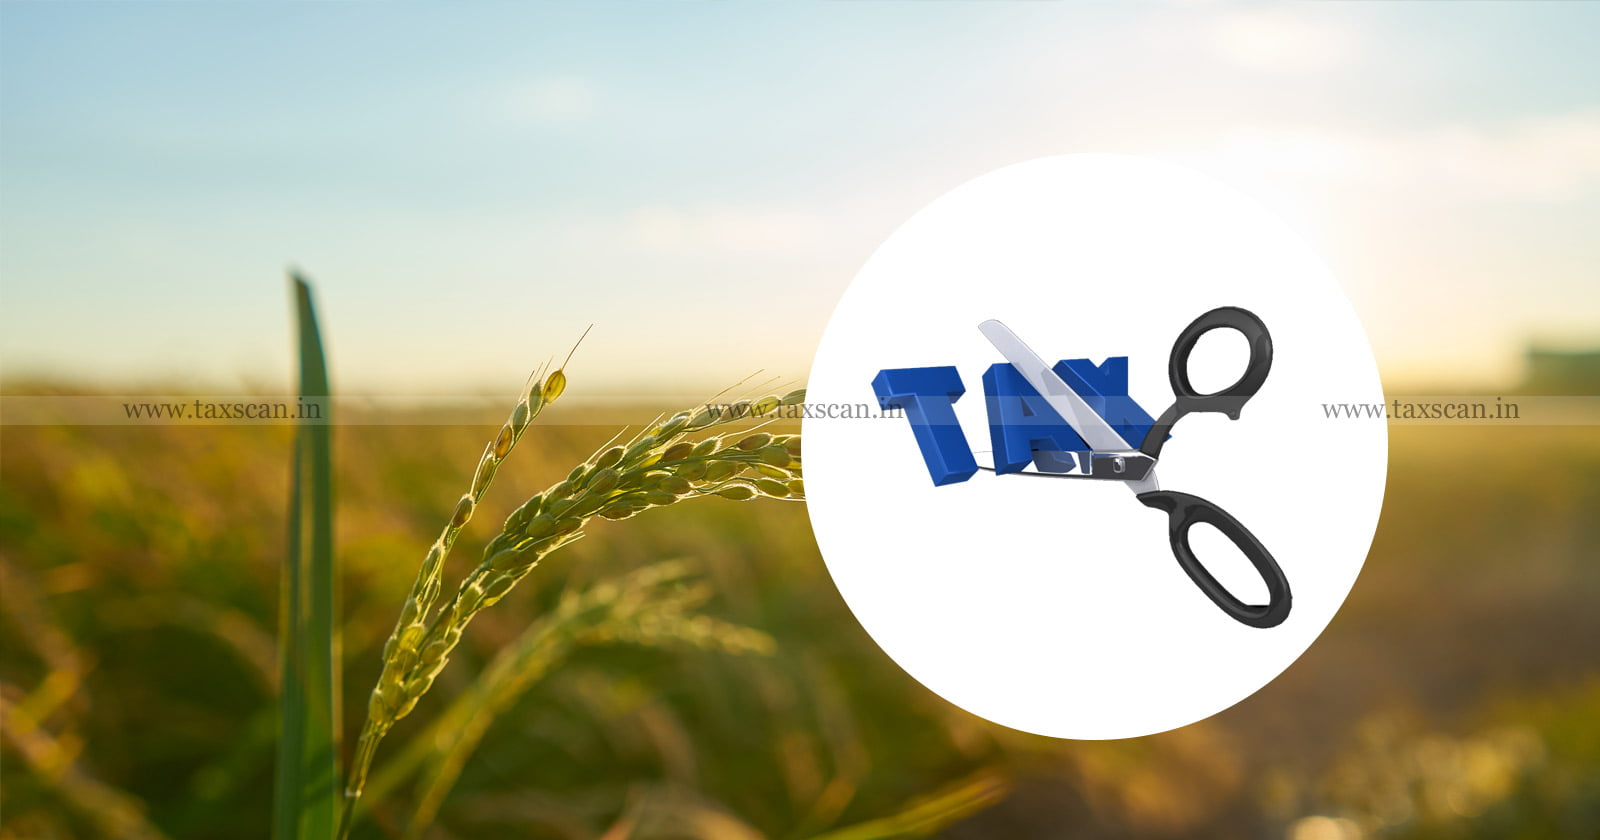 Capital Gain Exemption - Capital Gain - Cultivated Land - ITAT - Income Tax - taxscan